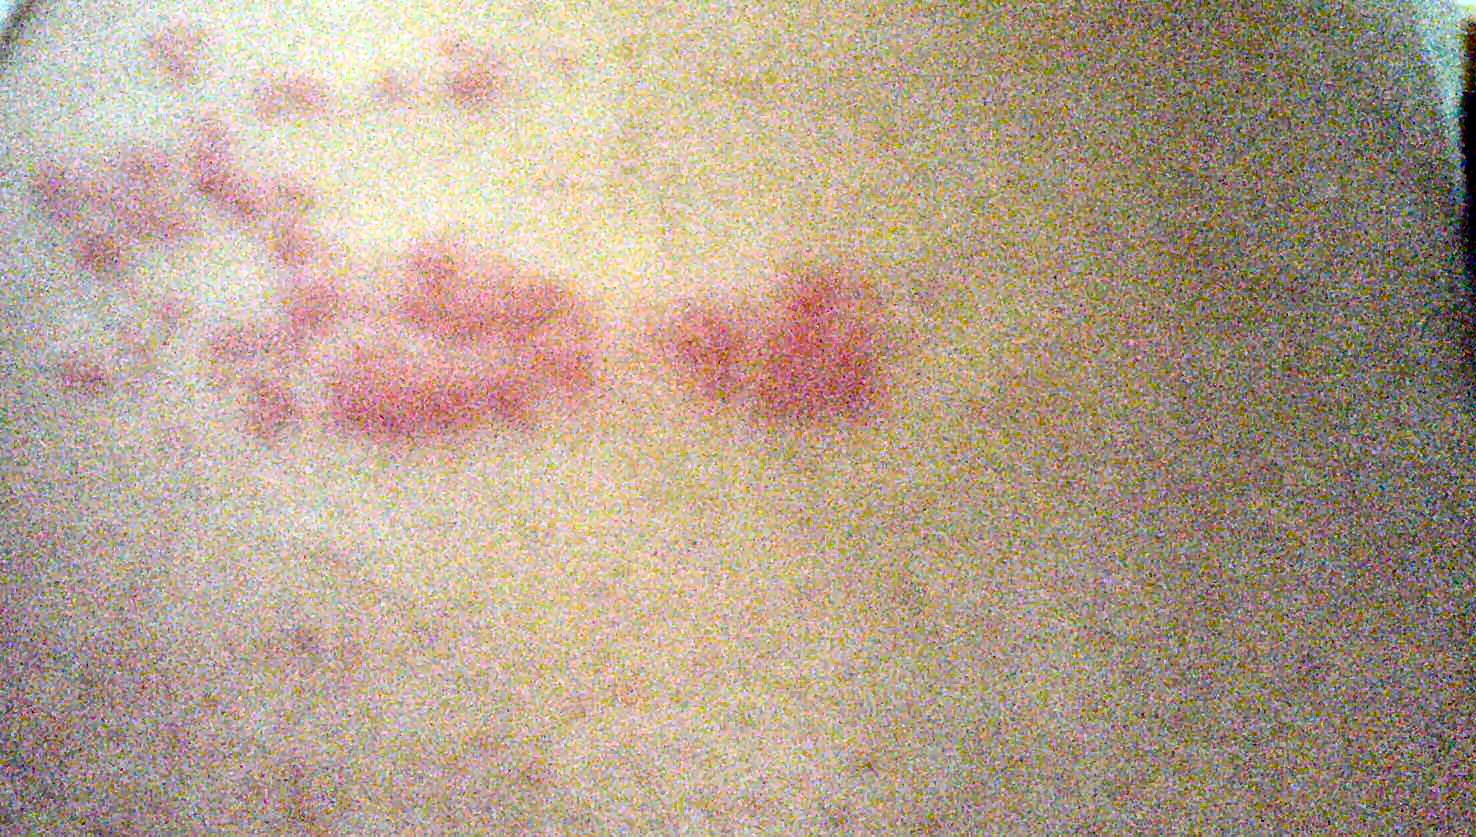 Herpes zoster blisters day 1.